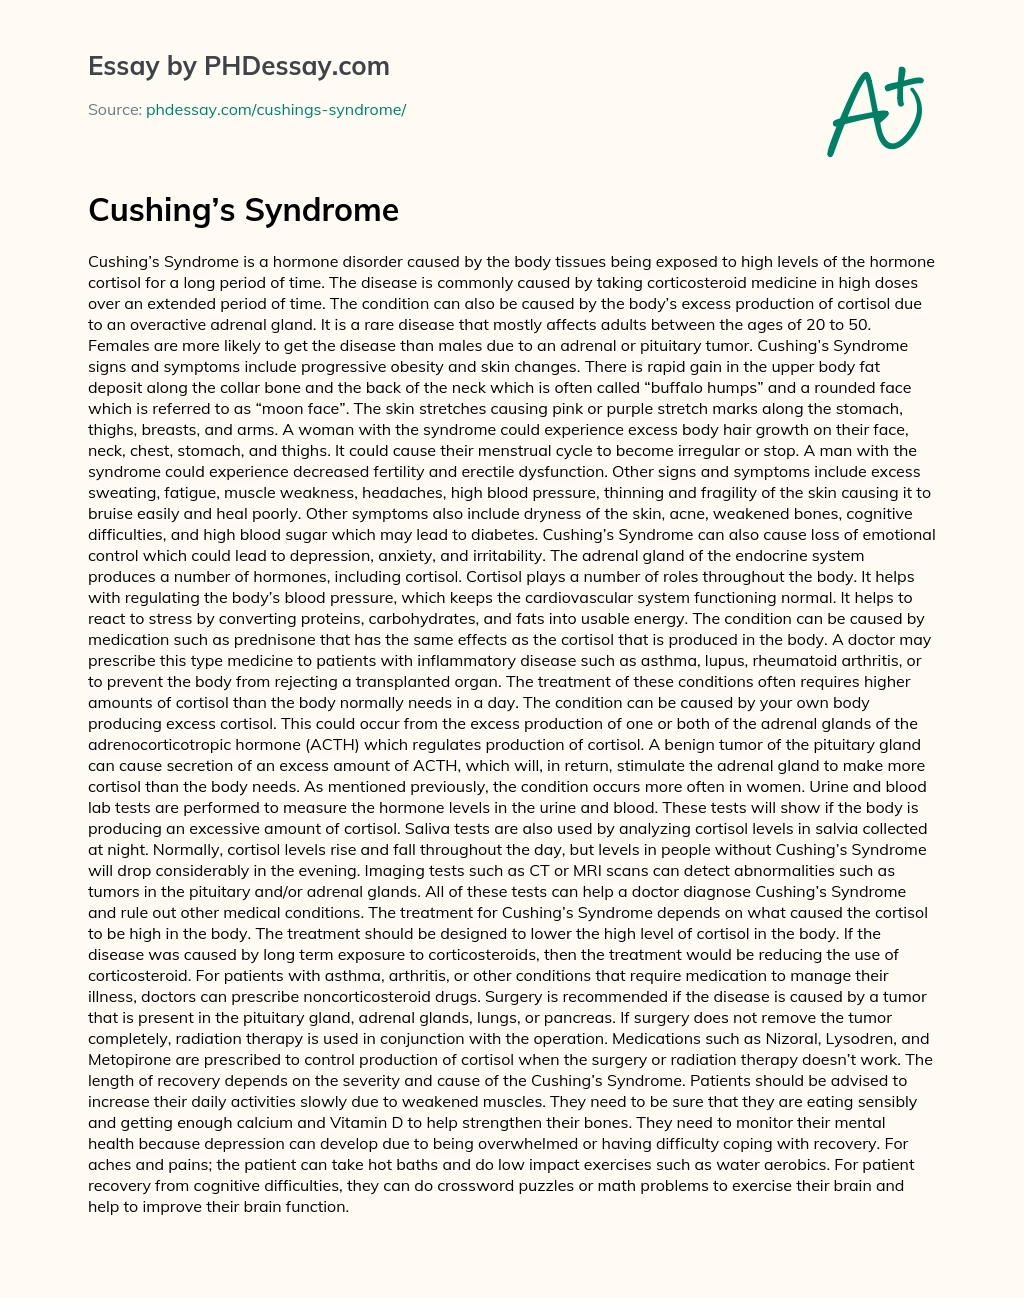 Cushing’s Syndrome essay